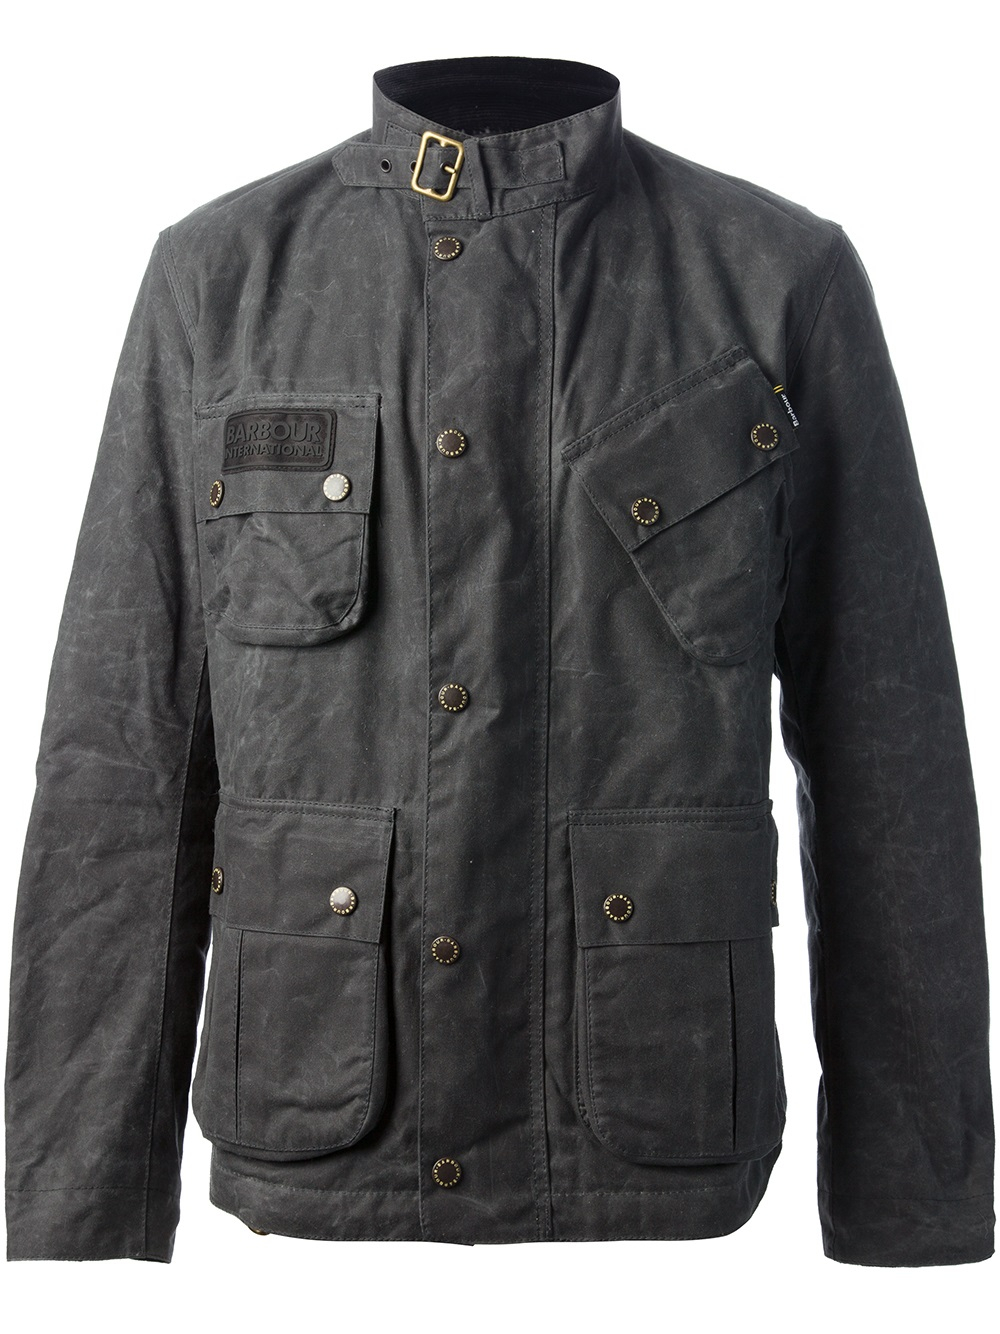 Barbour Military Jacket in Grey (Gray) for Men - Lyst